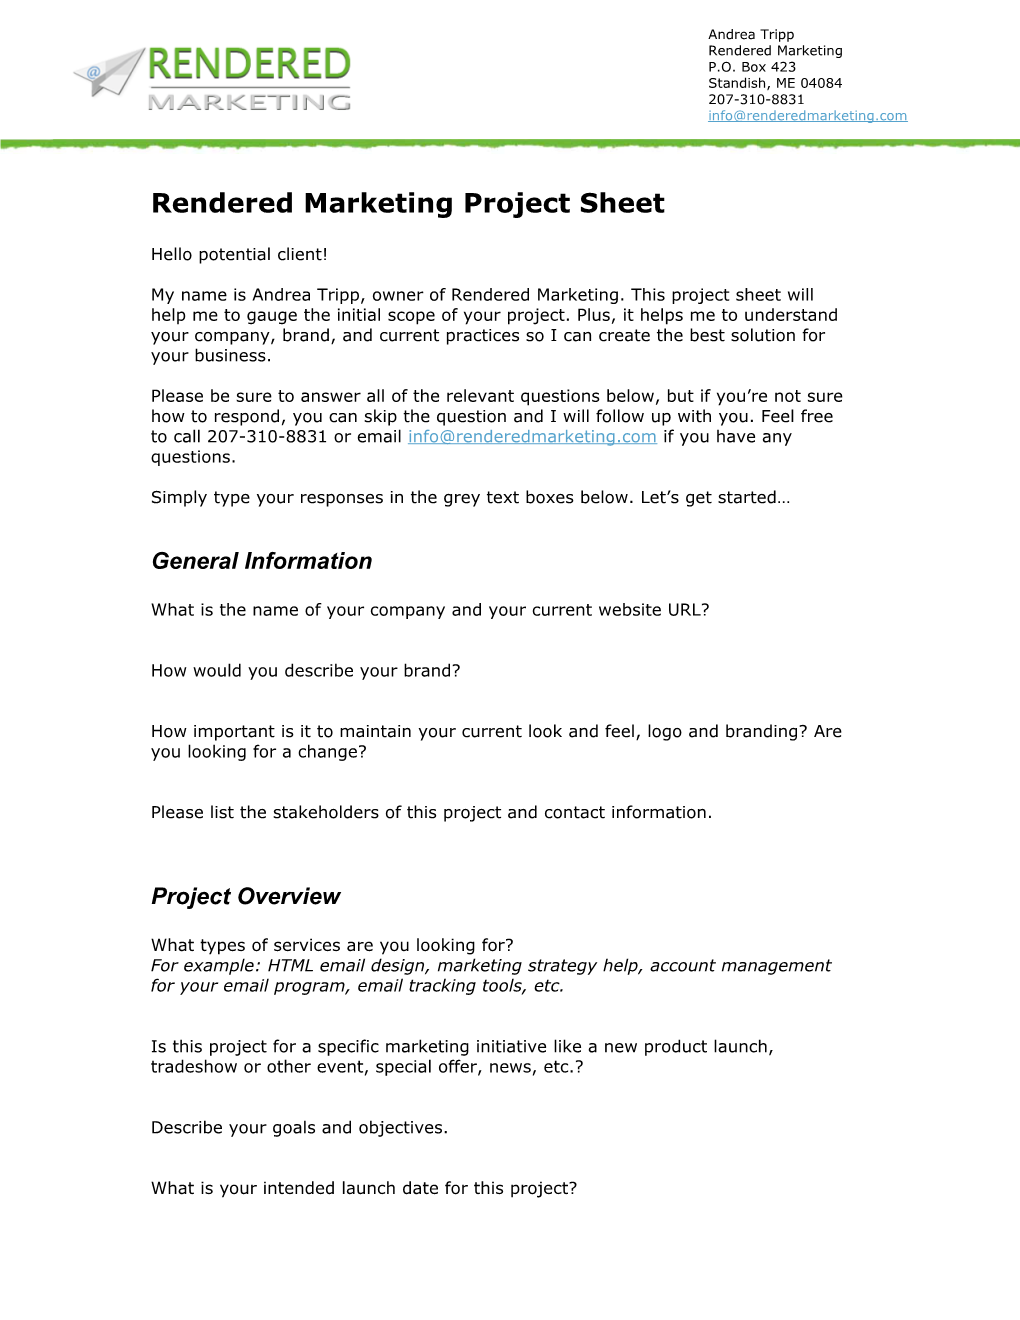 Rendered Marketing Project Sheet